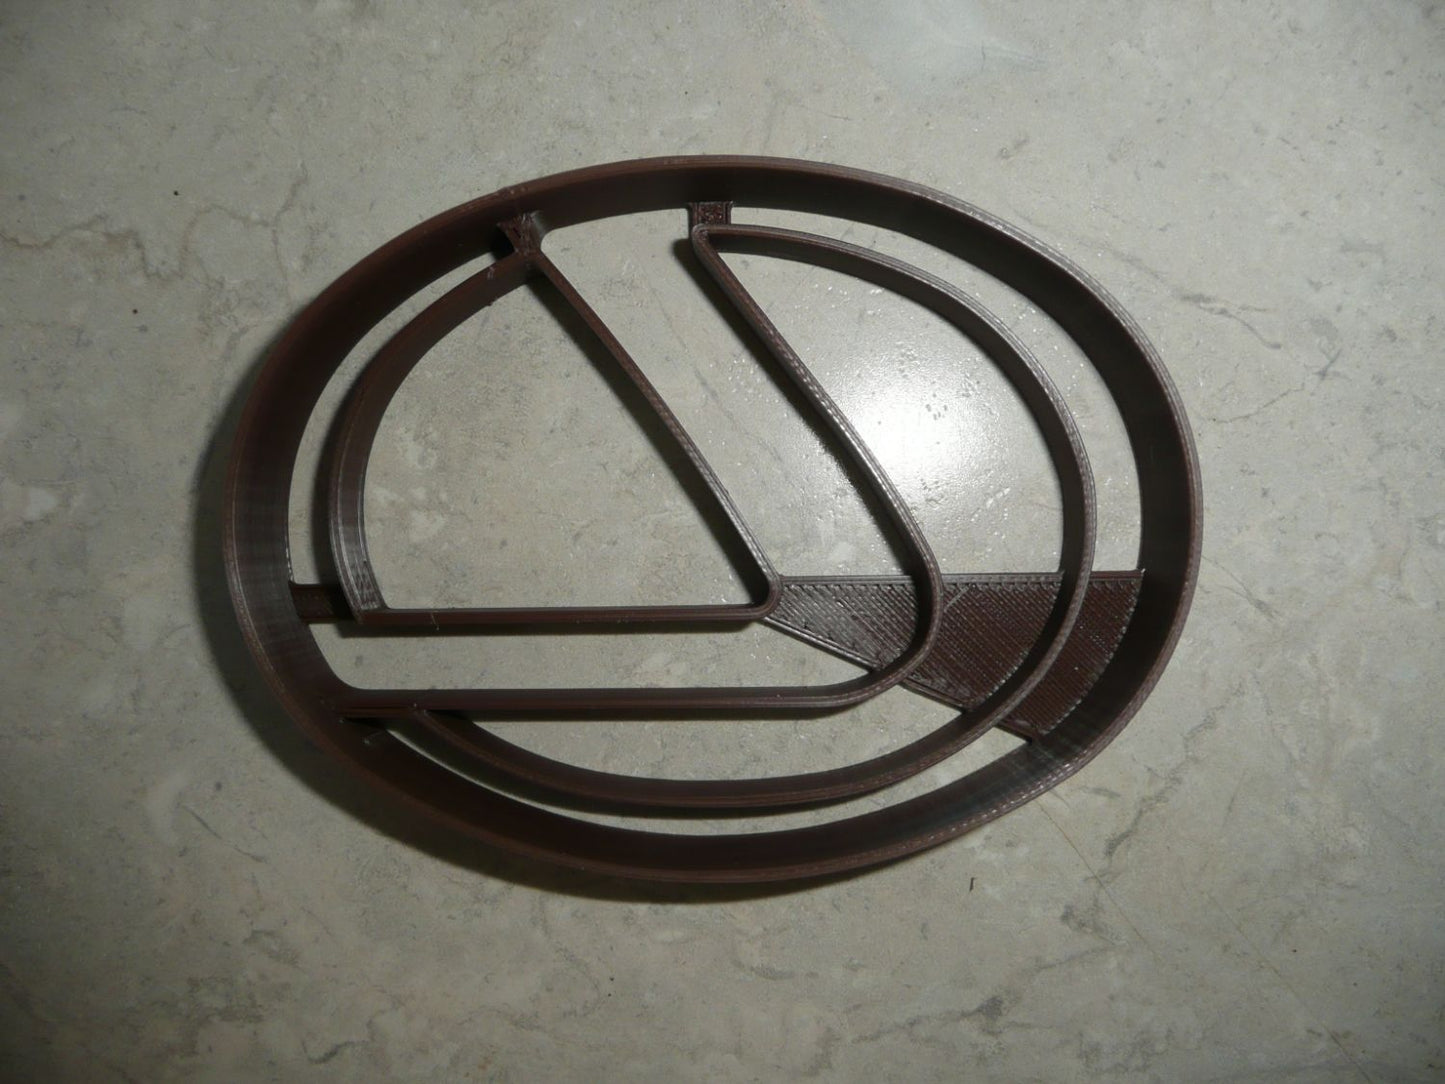 Lexus Luxury Vehicle Iconic Symbol Cookie Cutter Made In USA PR4542